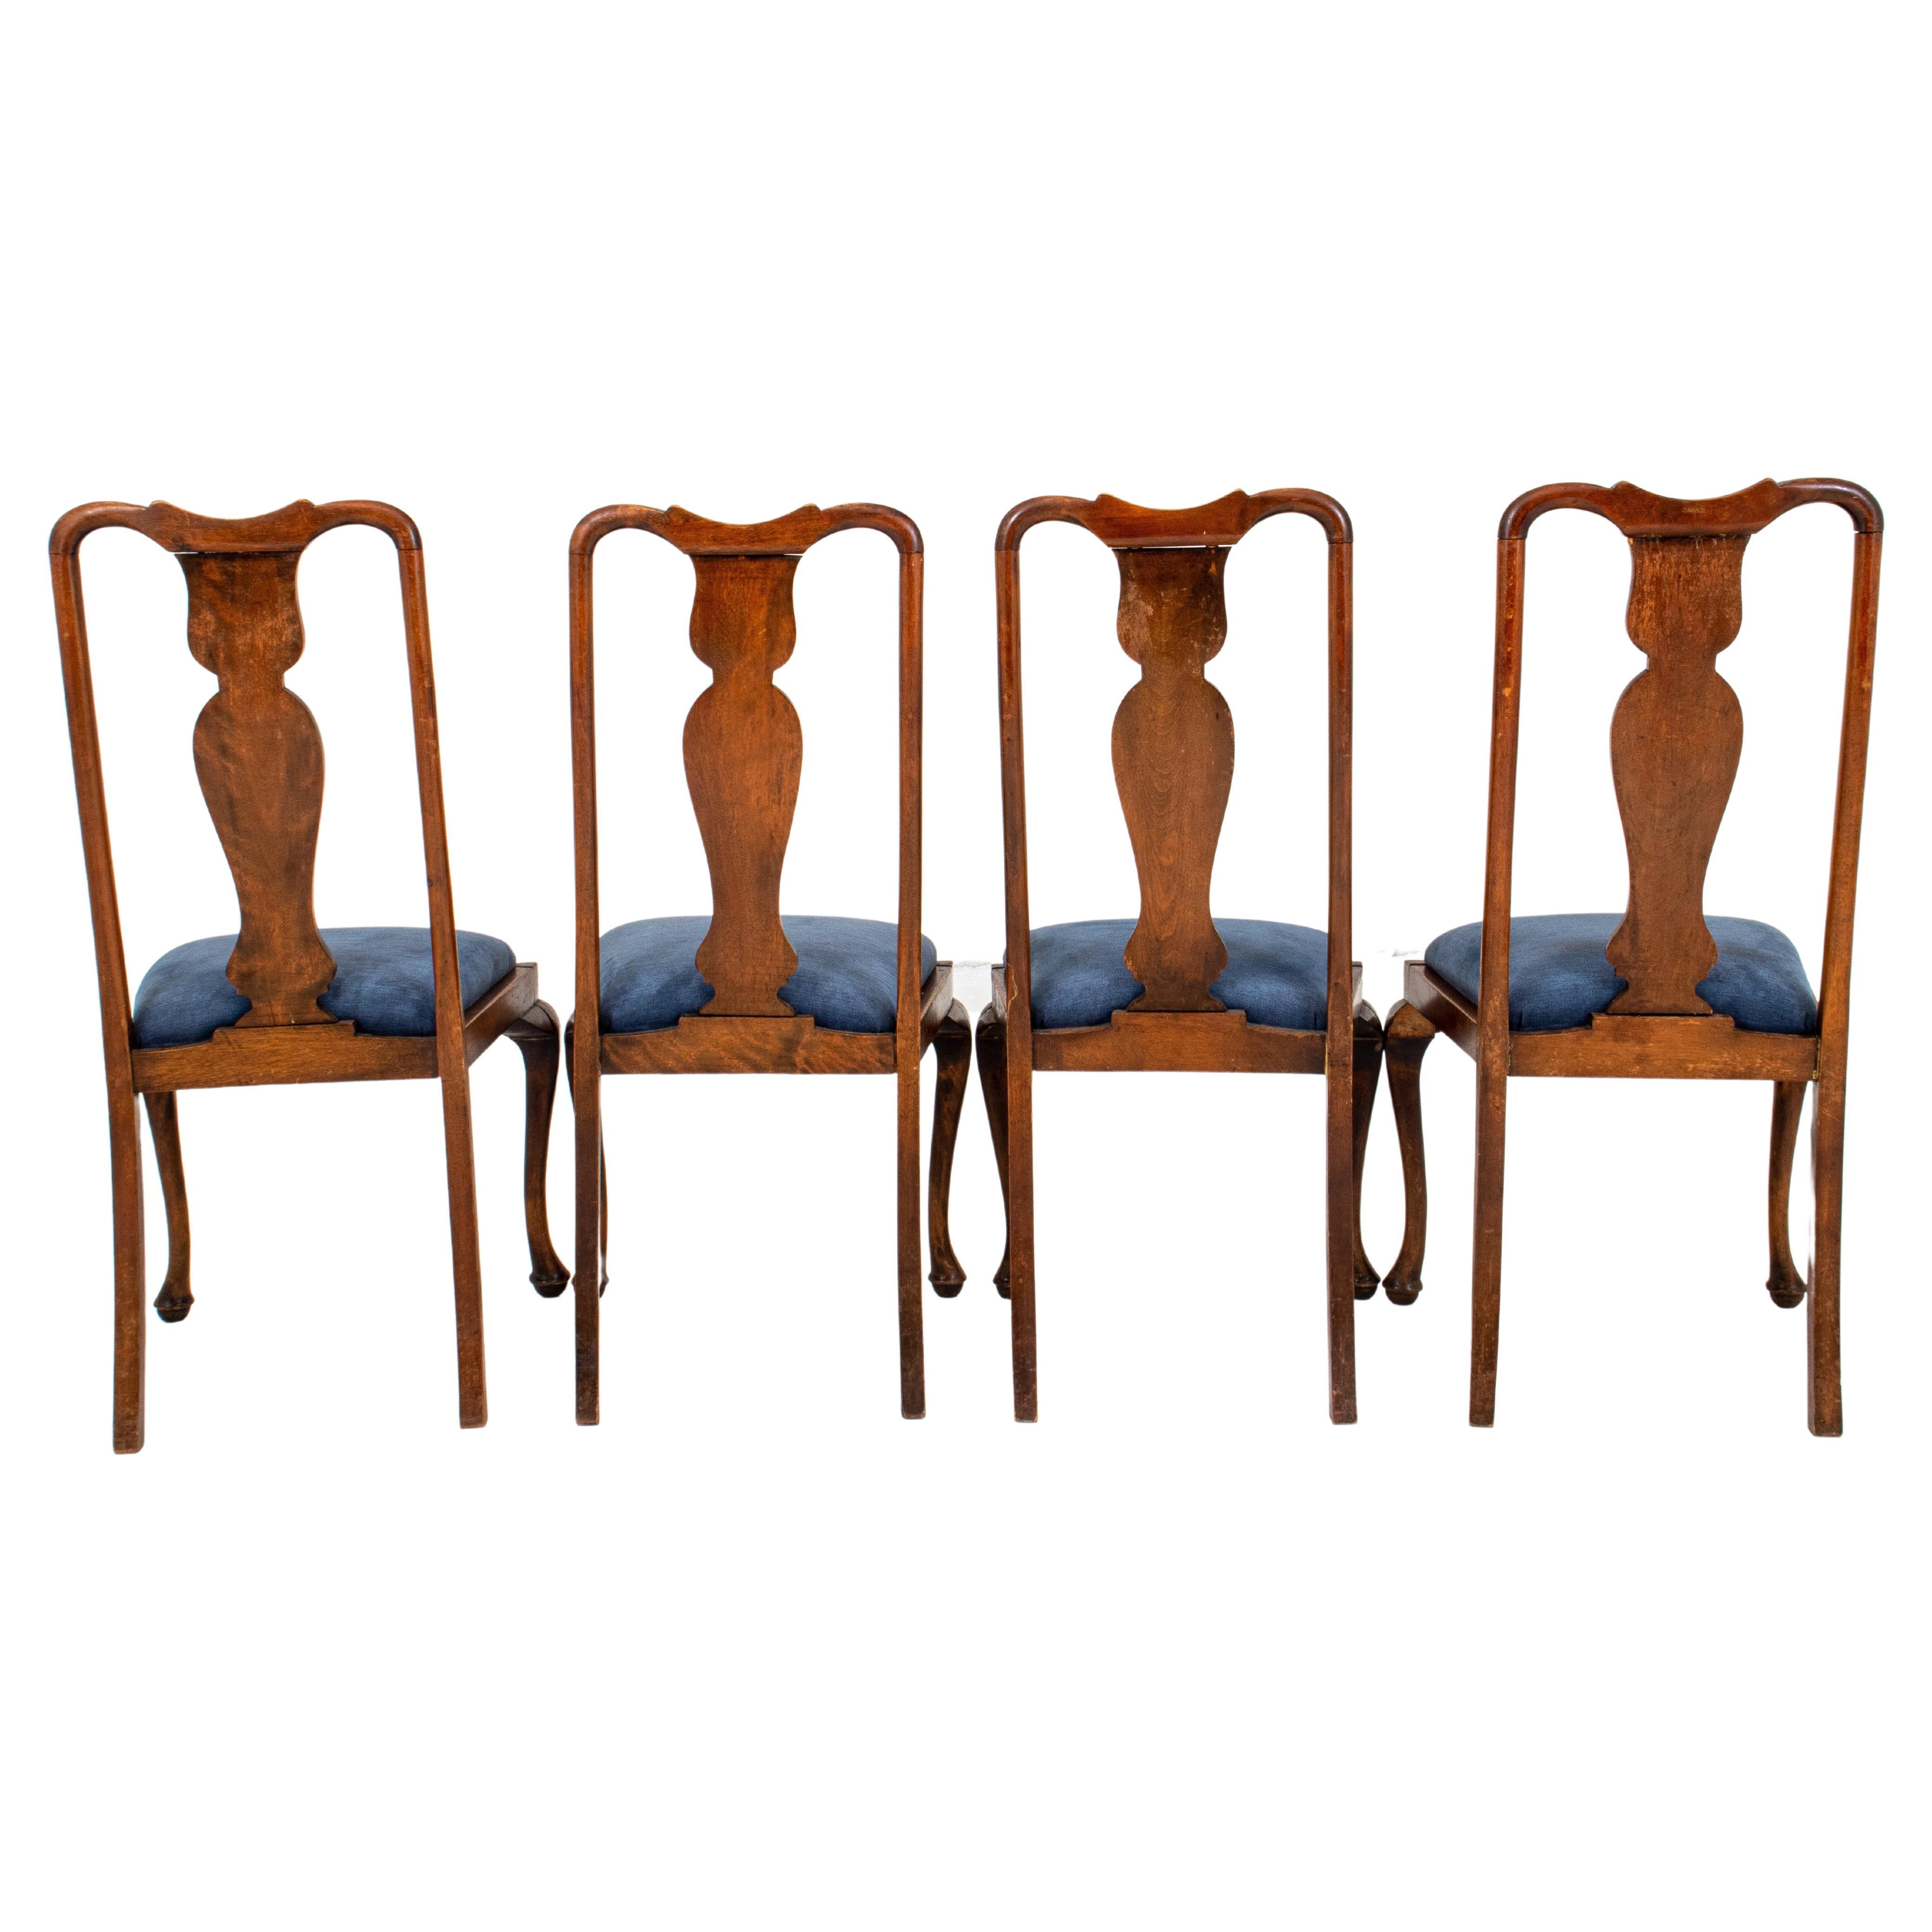 Set of four Queen Anne style wooden dining or side chairs with shaped crestrail, vase splats, and blue velvet-upholstered seats. 
Measures: 41.5